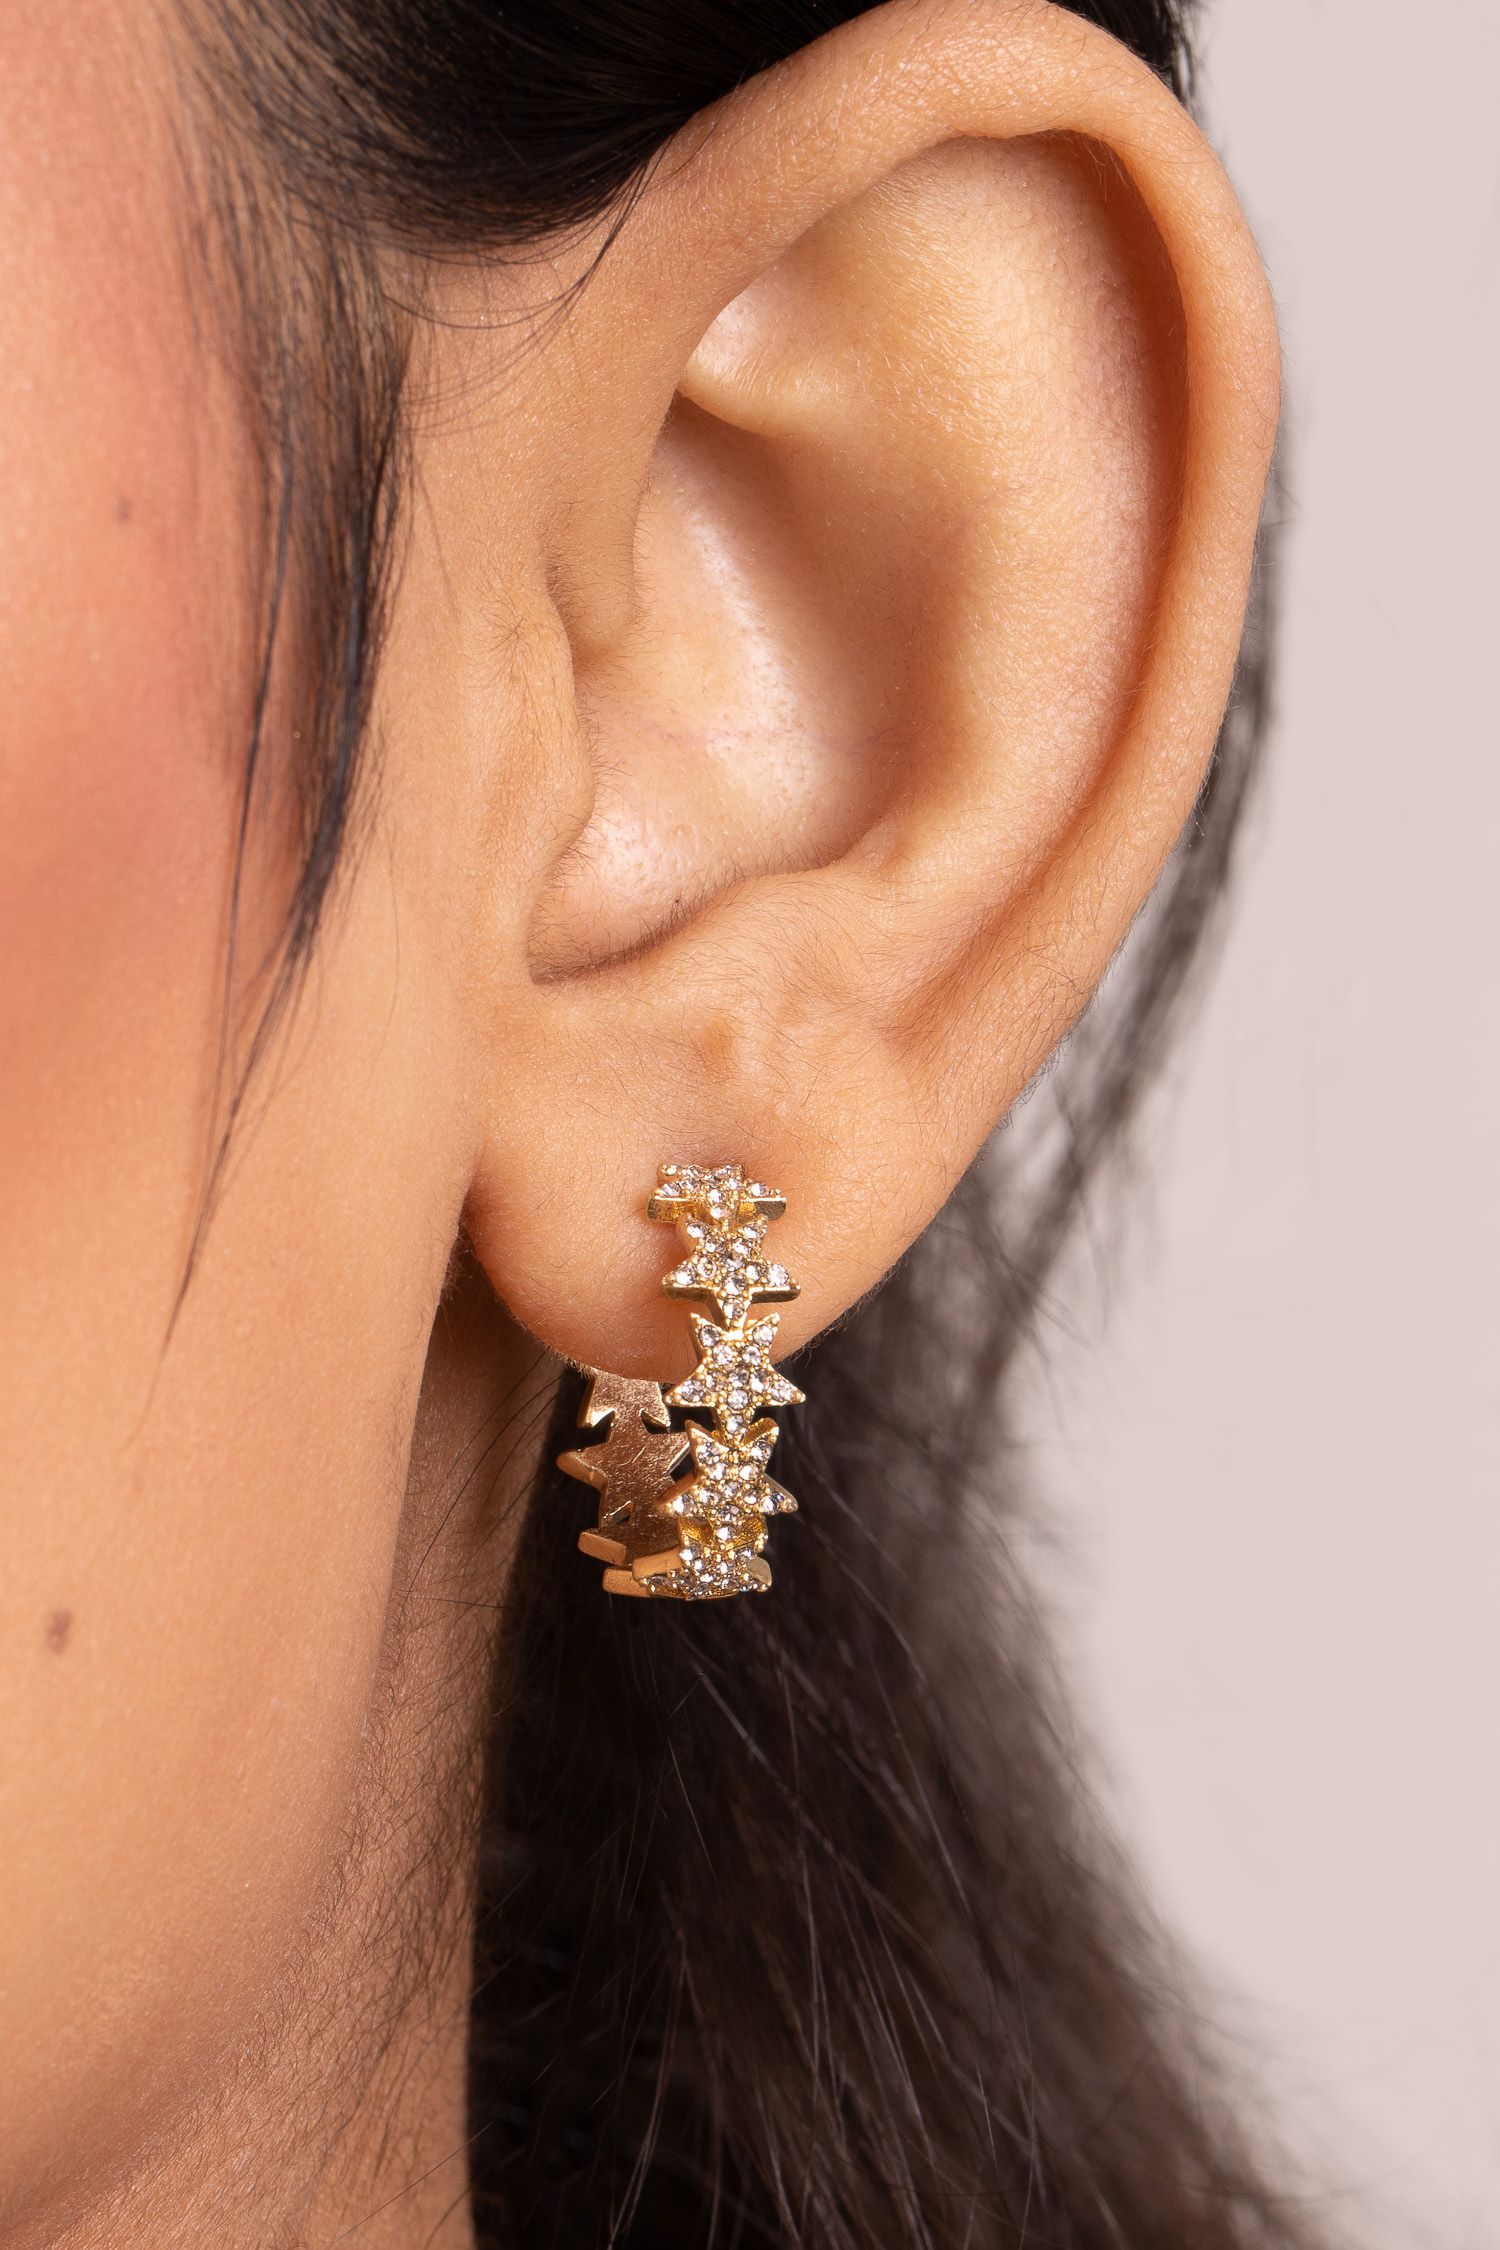 Unleash the twinkling star in you attracting attention with a subtle, yet sparkling style that can't be missed. Dazzle into the new season with these gold plated sparkly star earrings that are perfect for everyday wear for any occasion! The delicate gold tone earrings feature beautiful pave stars with a depth of 20mm. Presented in a KTx jewellery pouch to keep your jewellery safe or ideal for gifting!